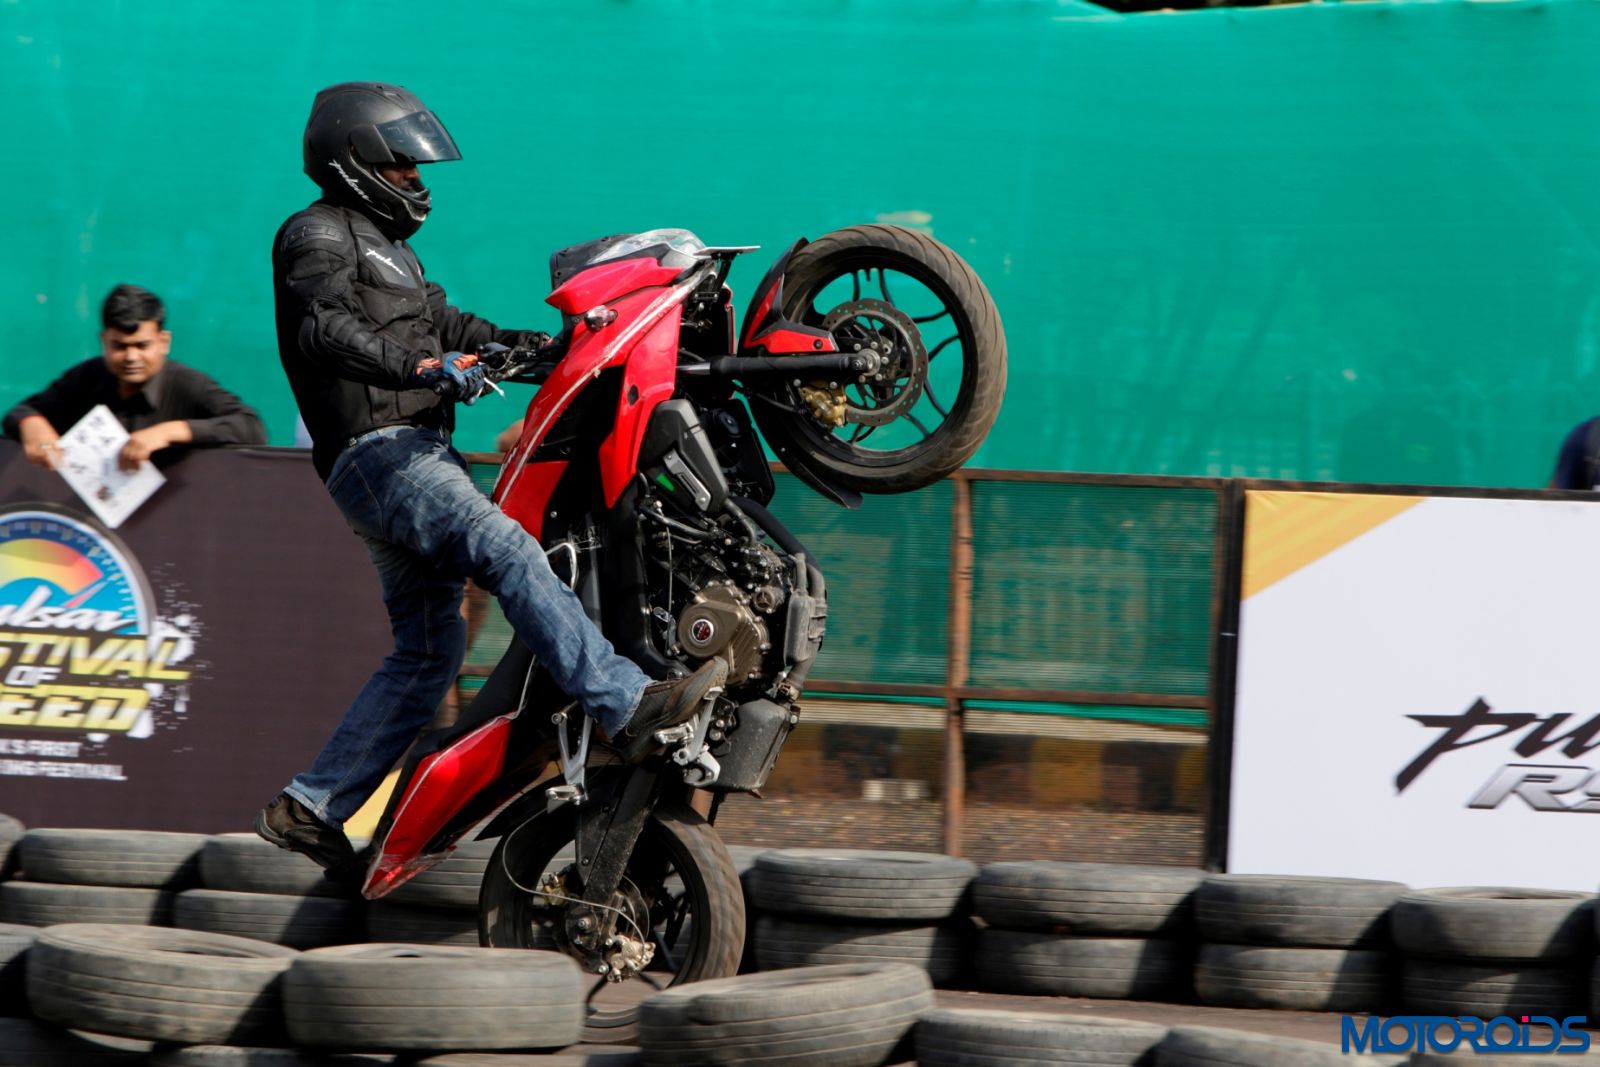 Bajaj Pulsar Festival of Speed gave locals an amazing experience at Leis...